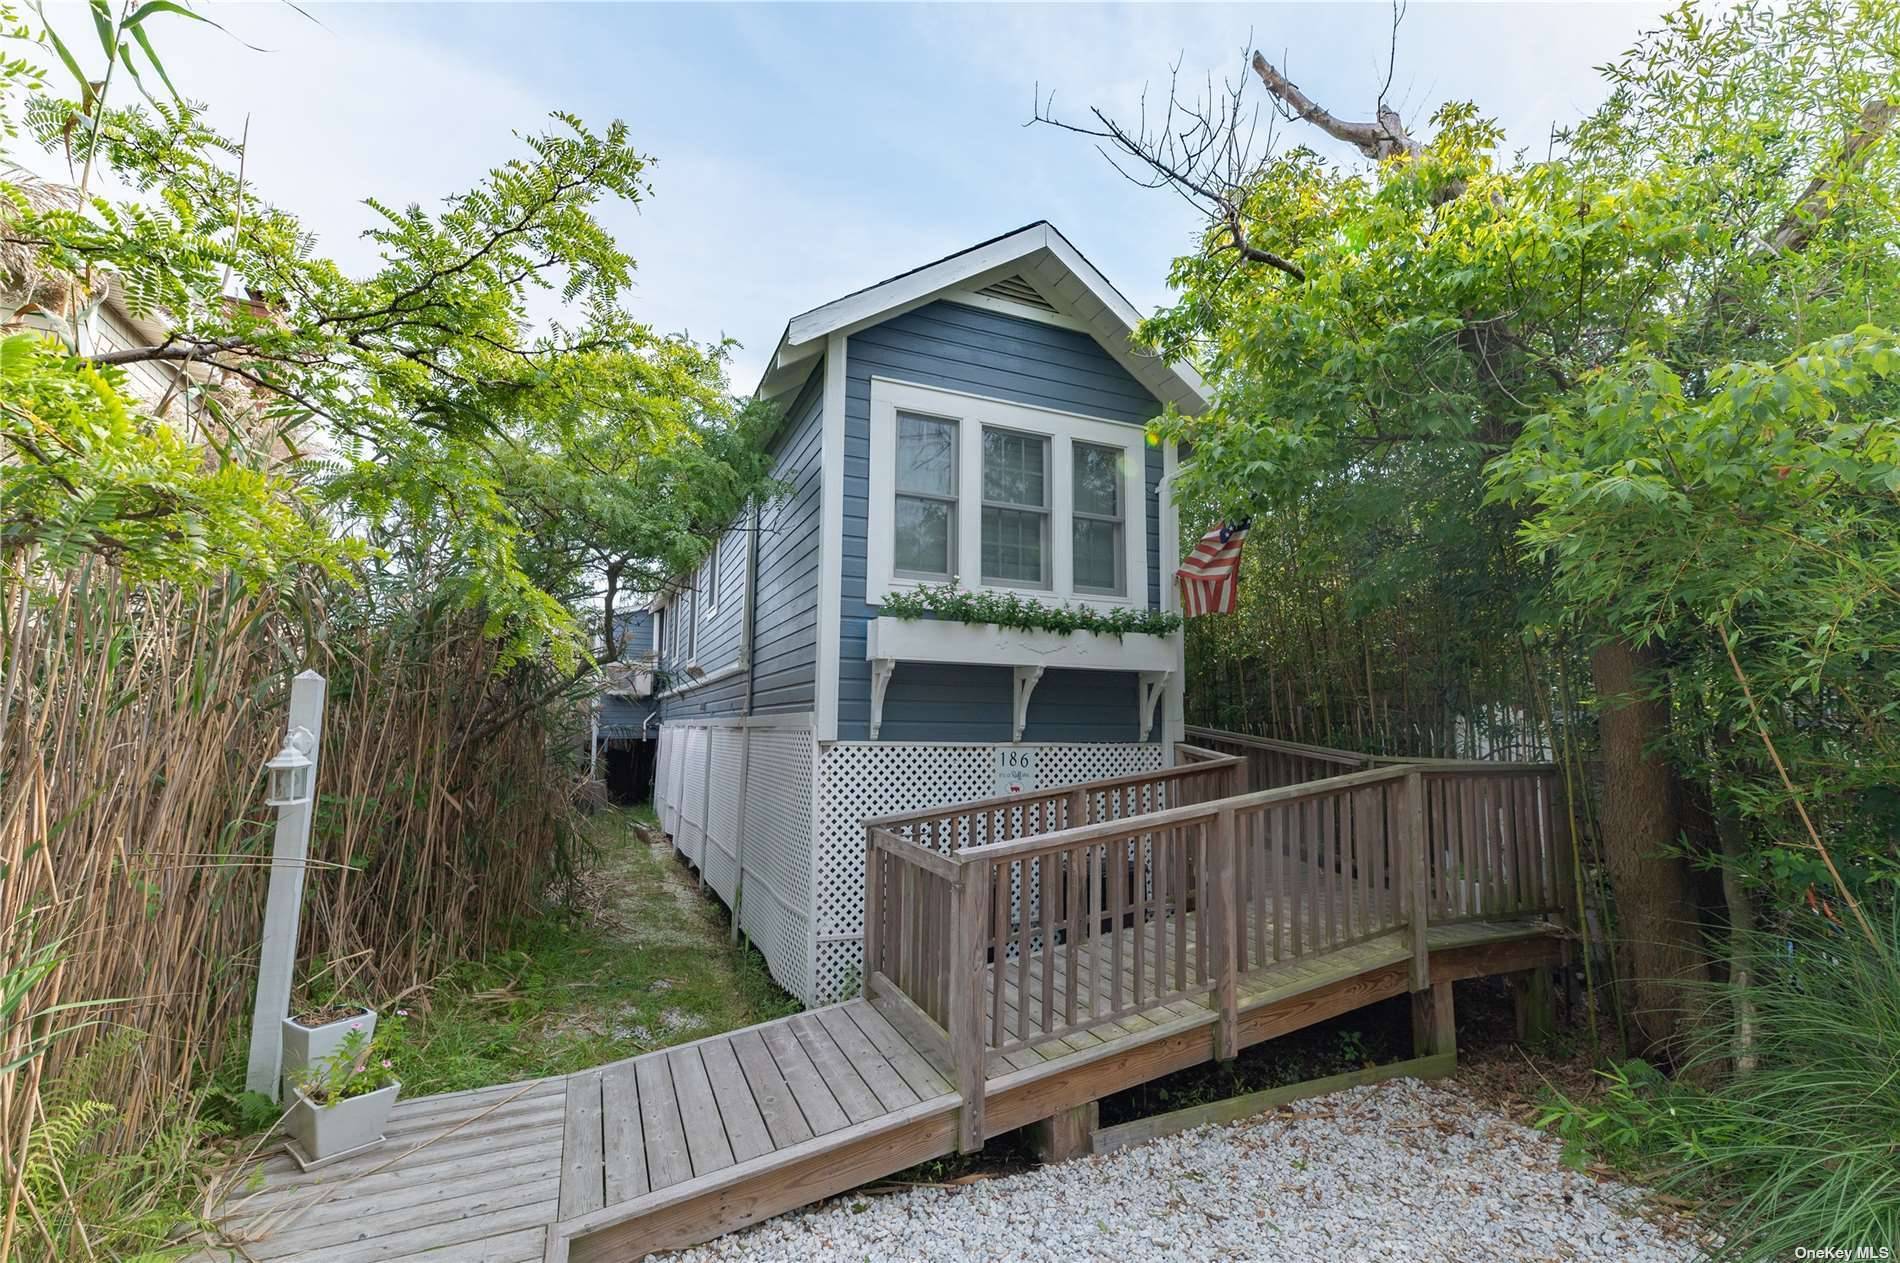 Adorable beach home with one bedroom amp ; one amp ; 1 2 baths has potential for more bedrooms, back deck for entertaining.